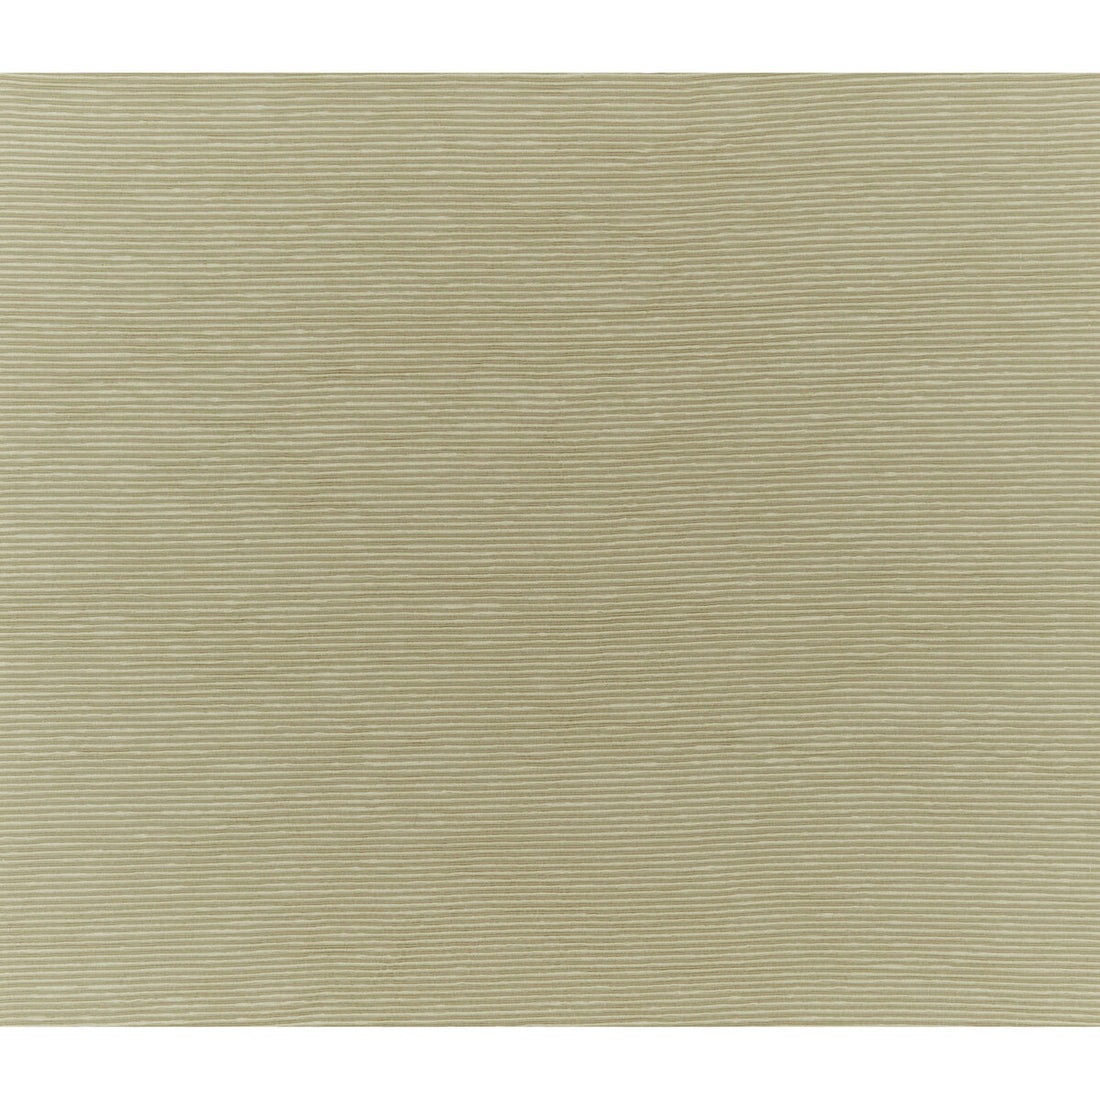 Metro fabric in creme color - pattern JAG-50044.16.0 - by Brunschwig &amp; Fils in the Jagtar collection